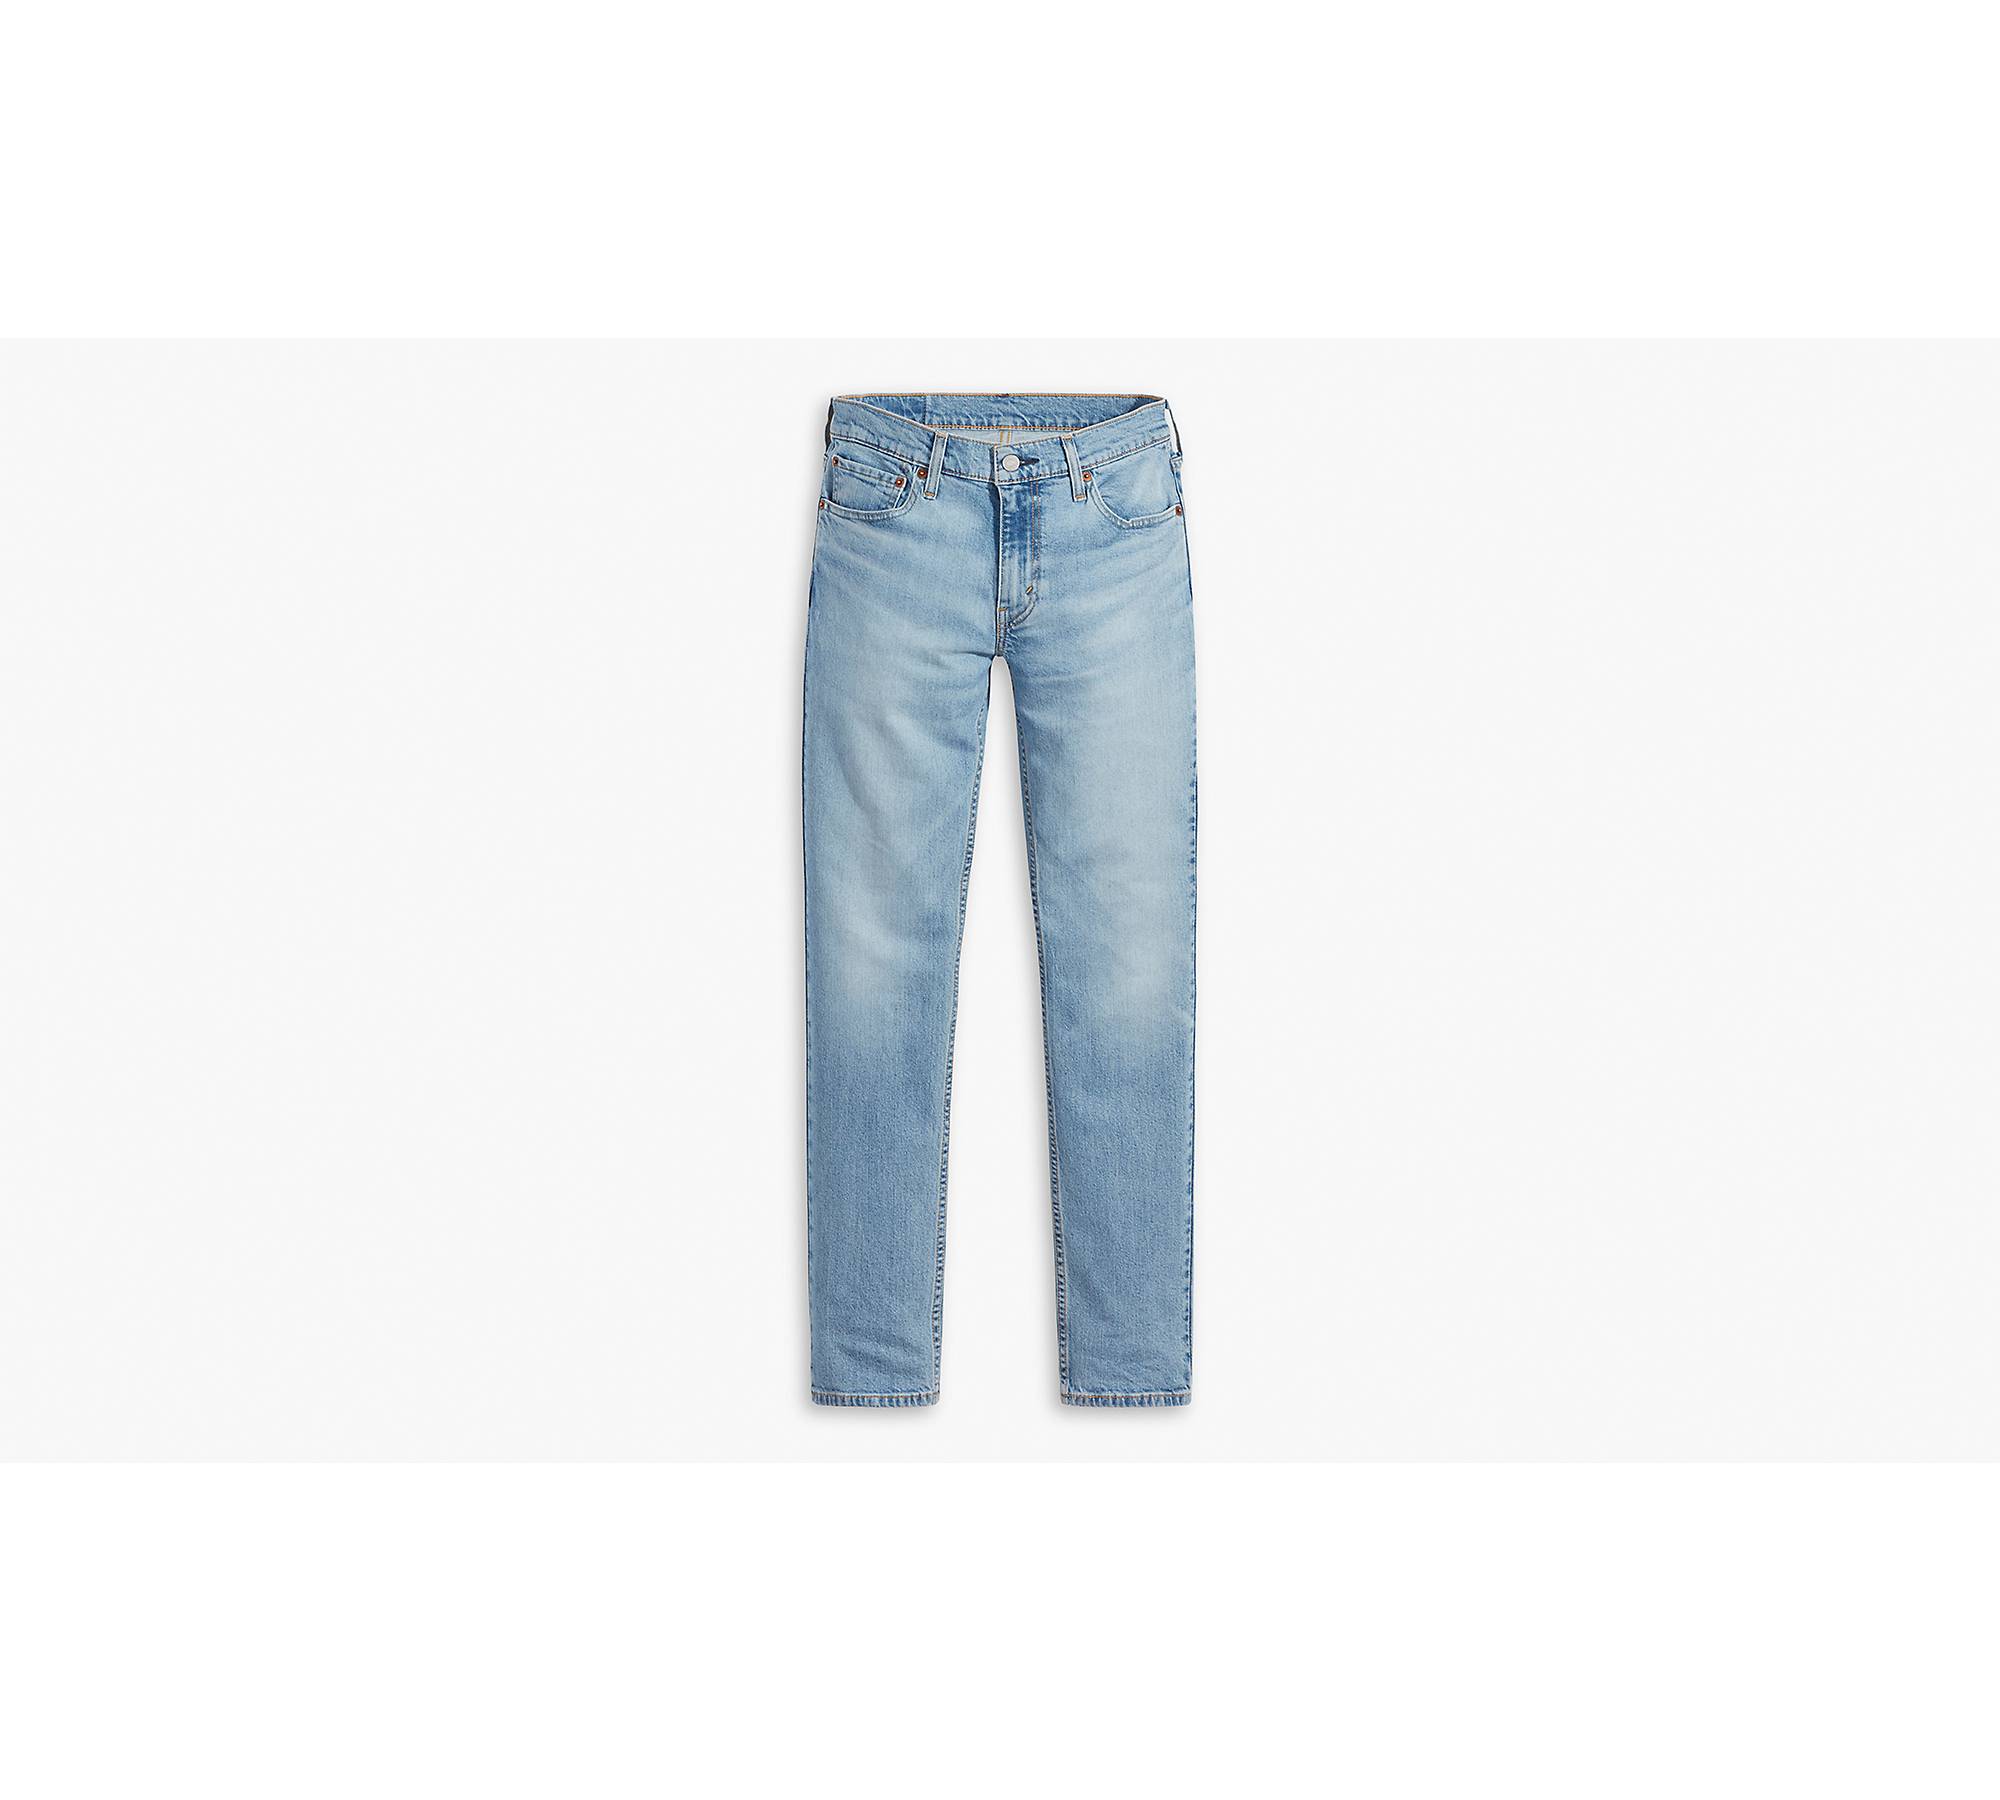 Men's Levi's Jeans, Ultimate Buying Guide, Fit, Colors, Materials & More